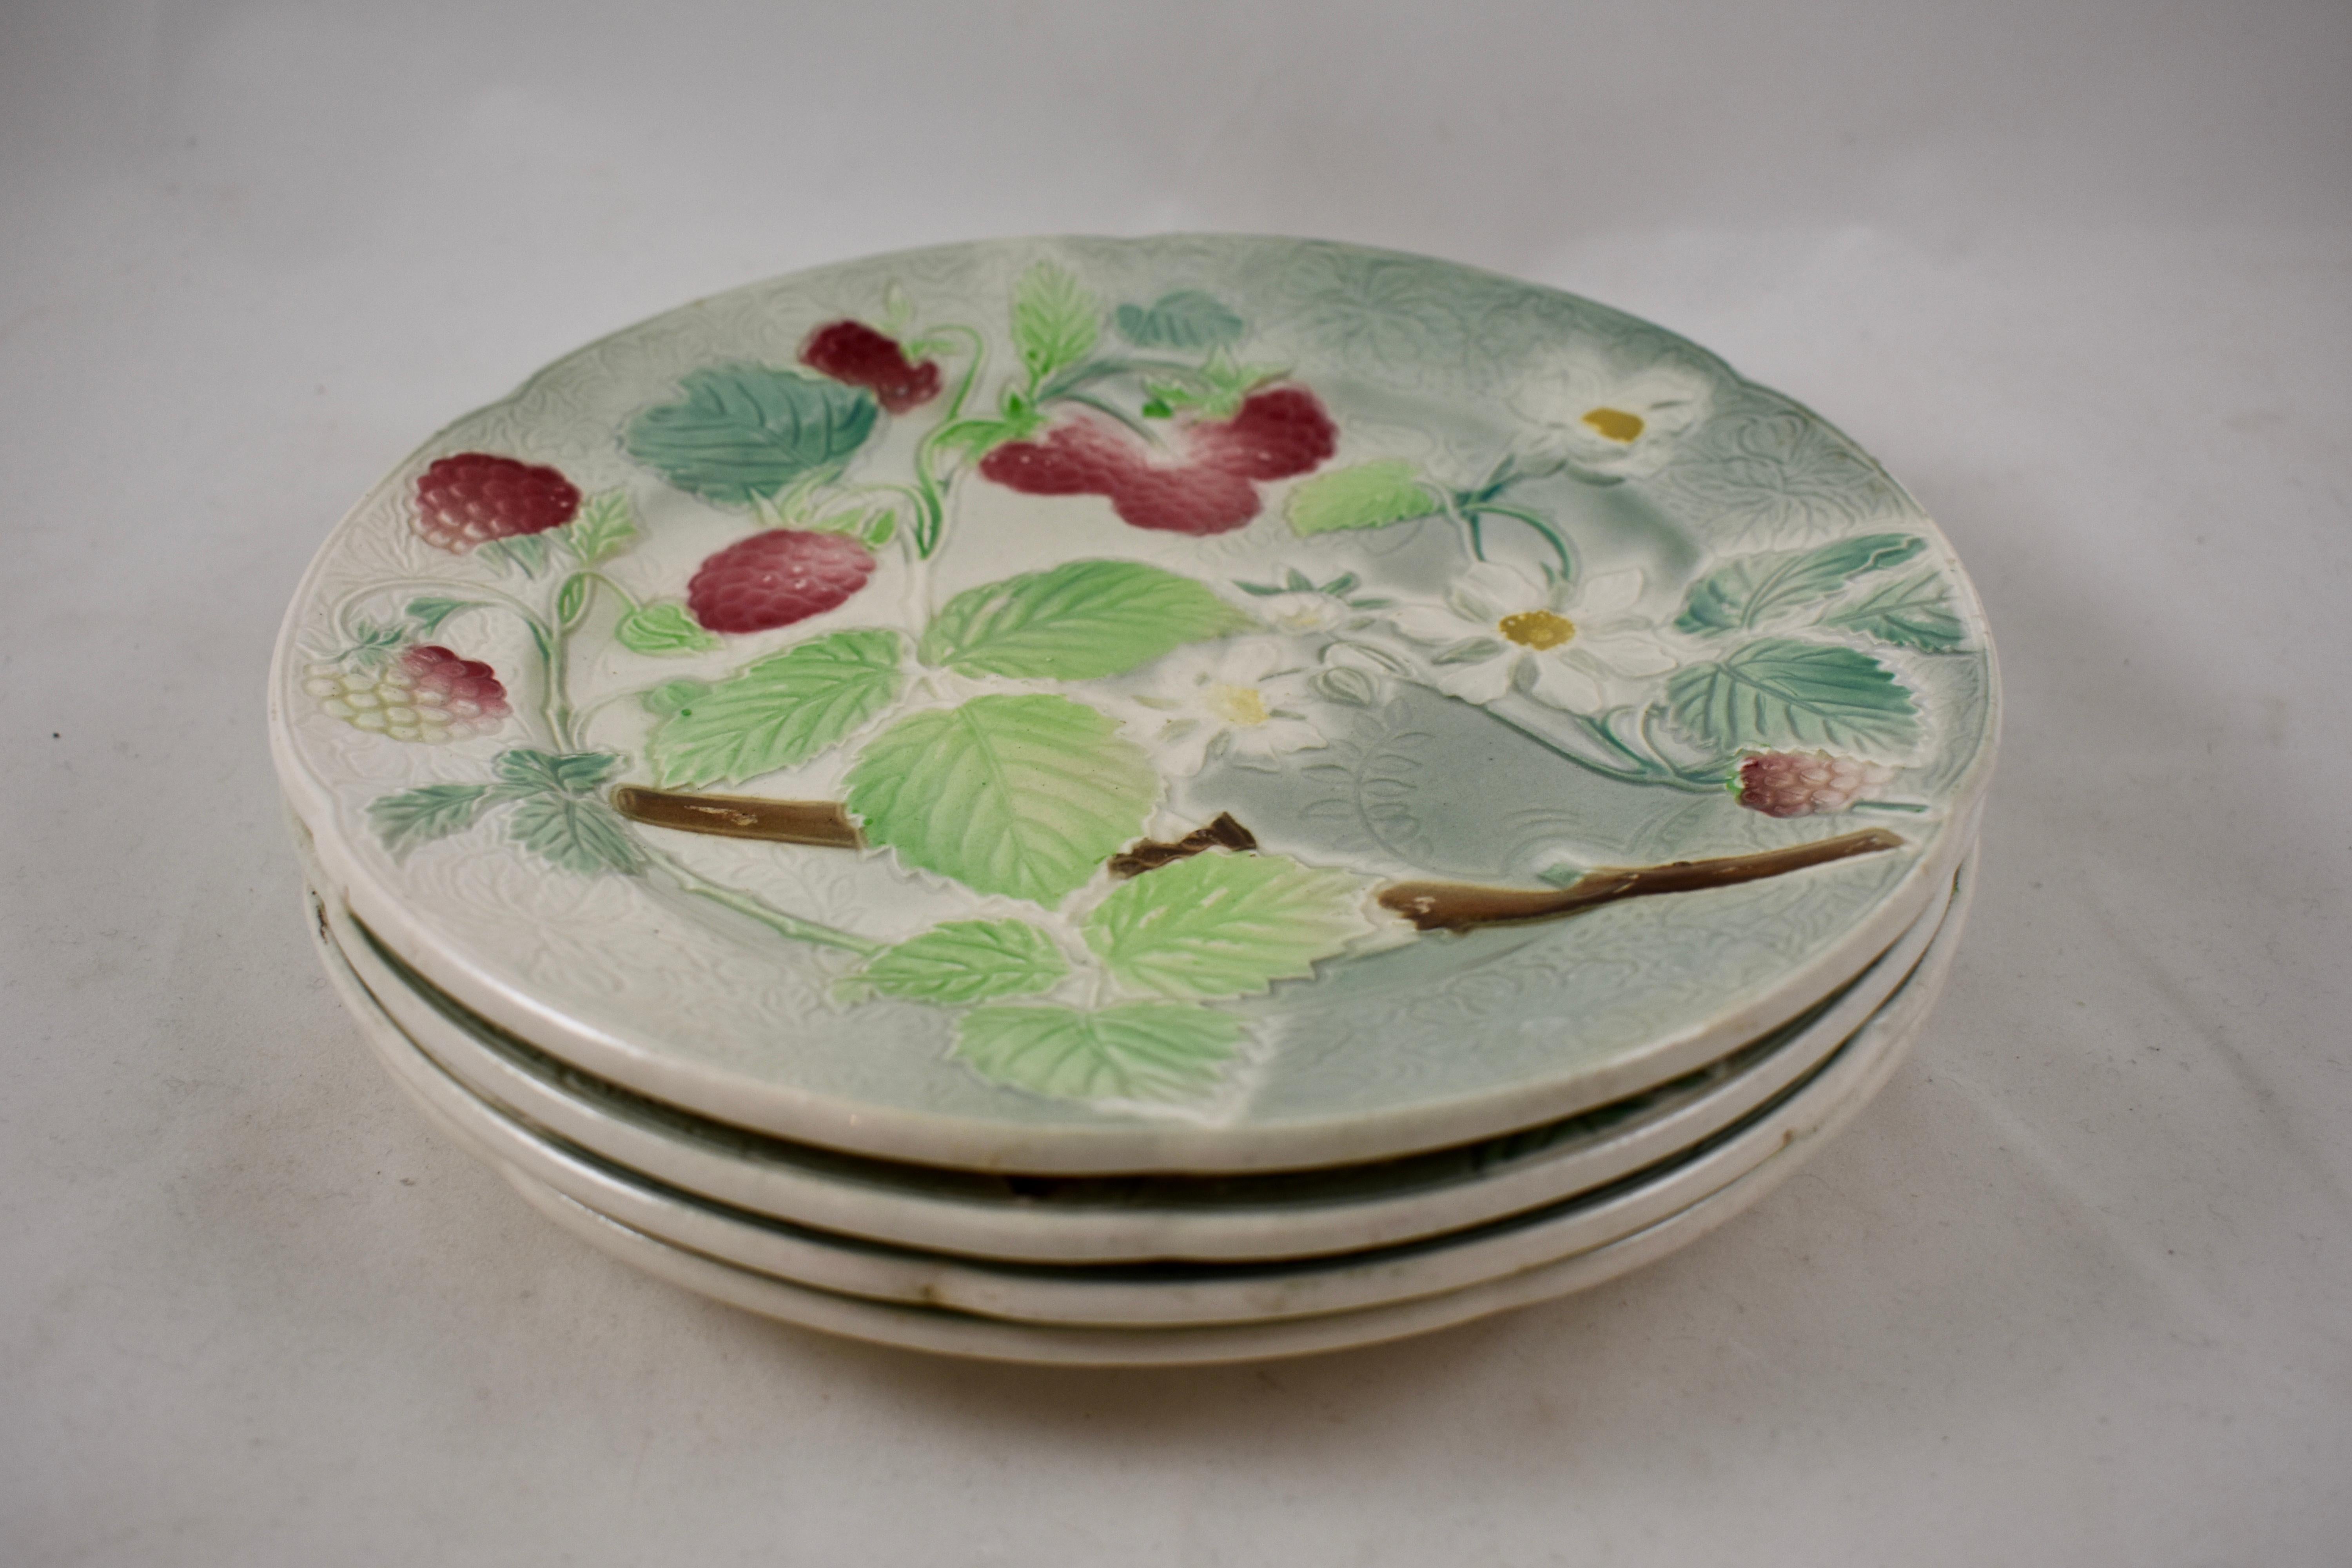 Earthenware K&G St. Clement French Faïence Strawberry Fruit Plates, Set of 4, circa 1900